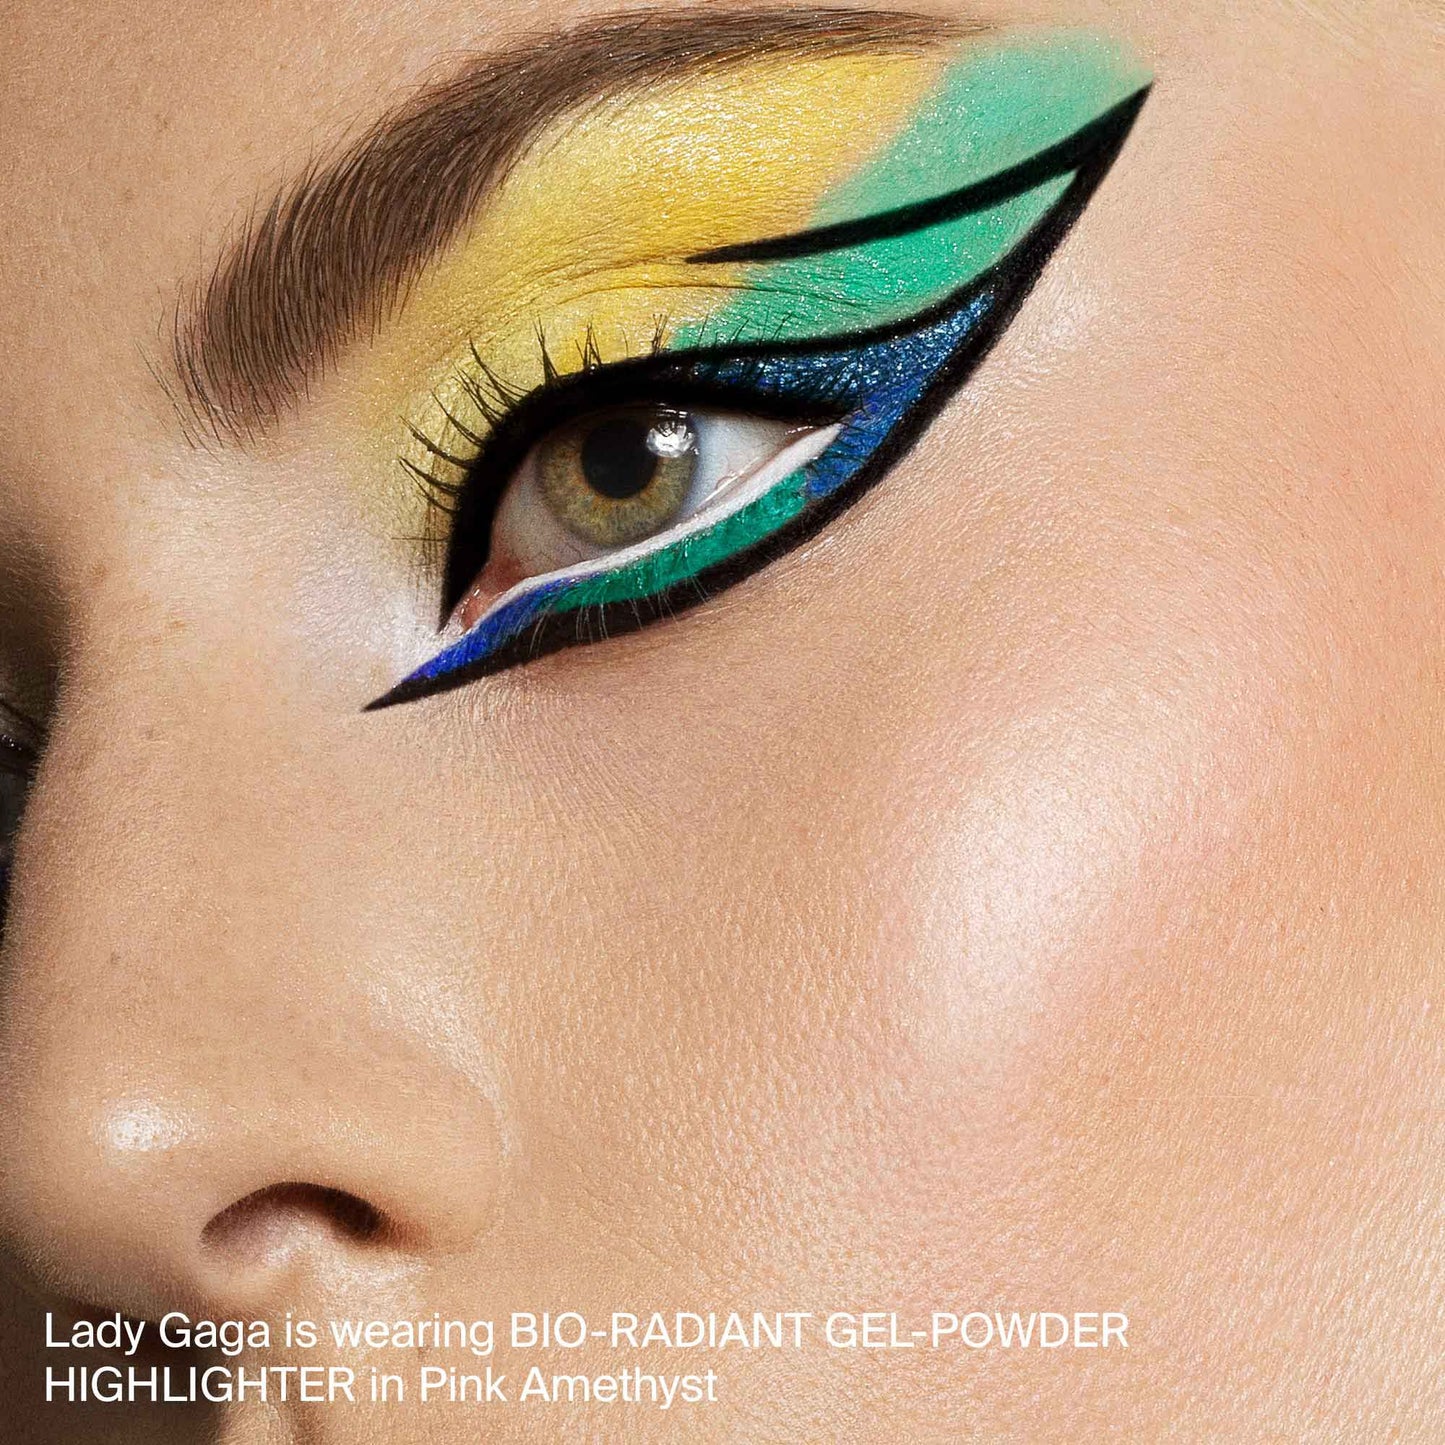 HAUS LABS BY LADY GAGA Bio-Radiant Gel-Powder Highlighter with Fermented Arnica